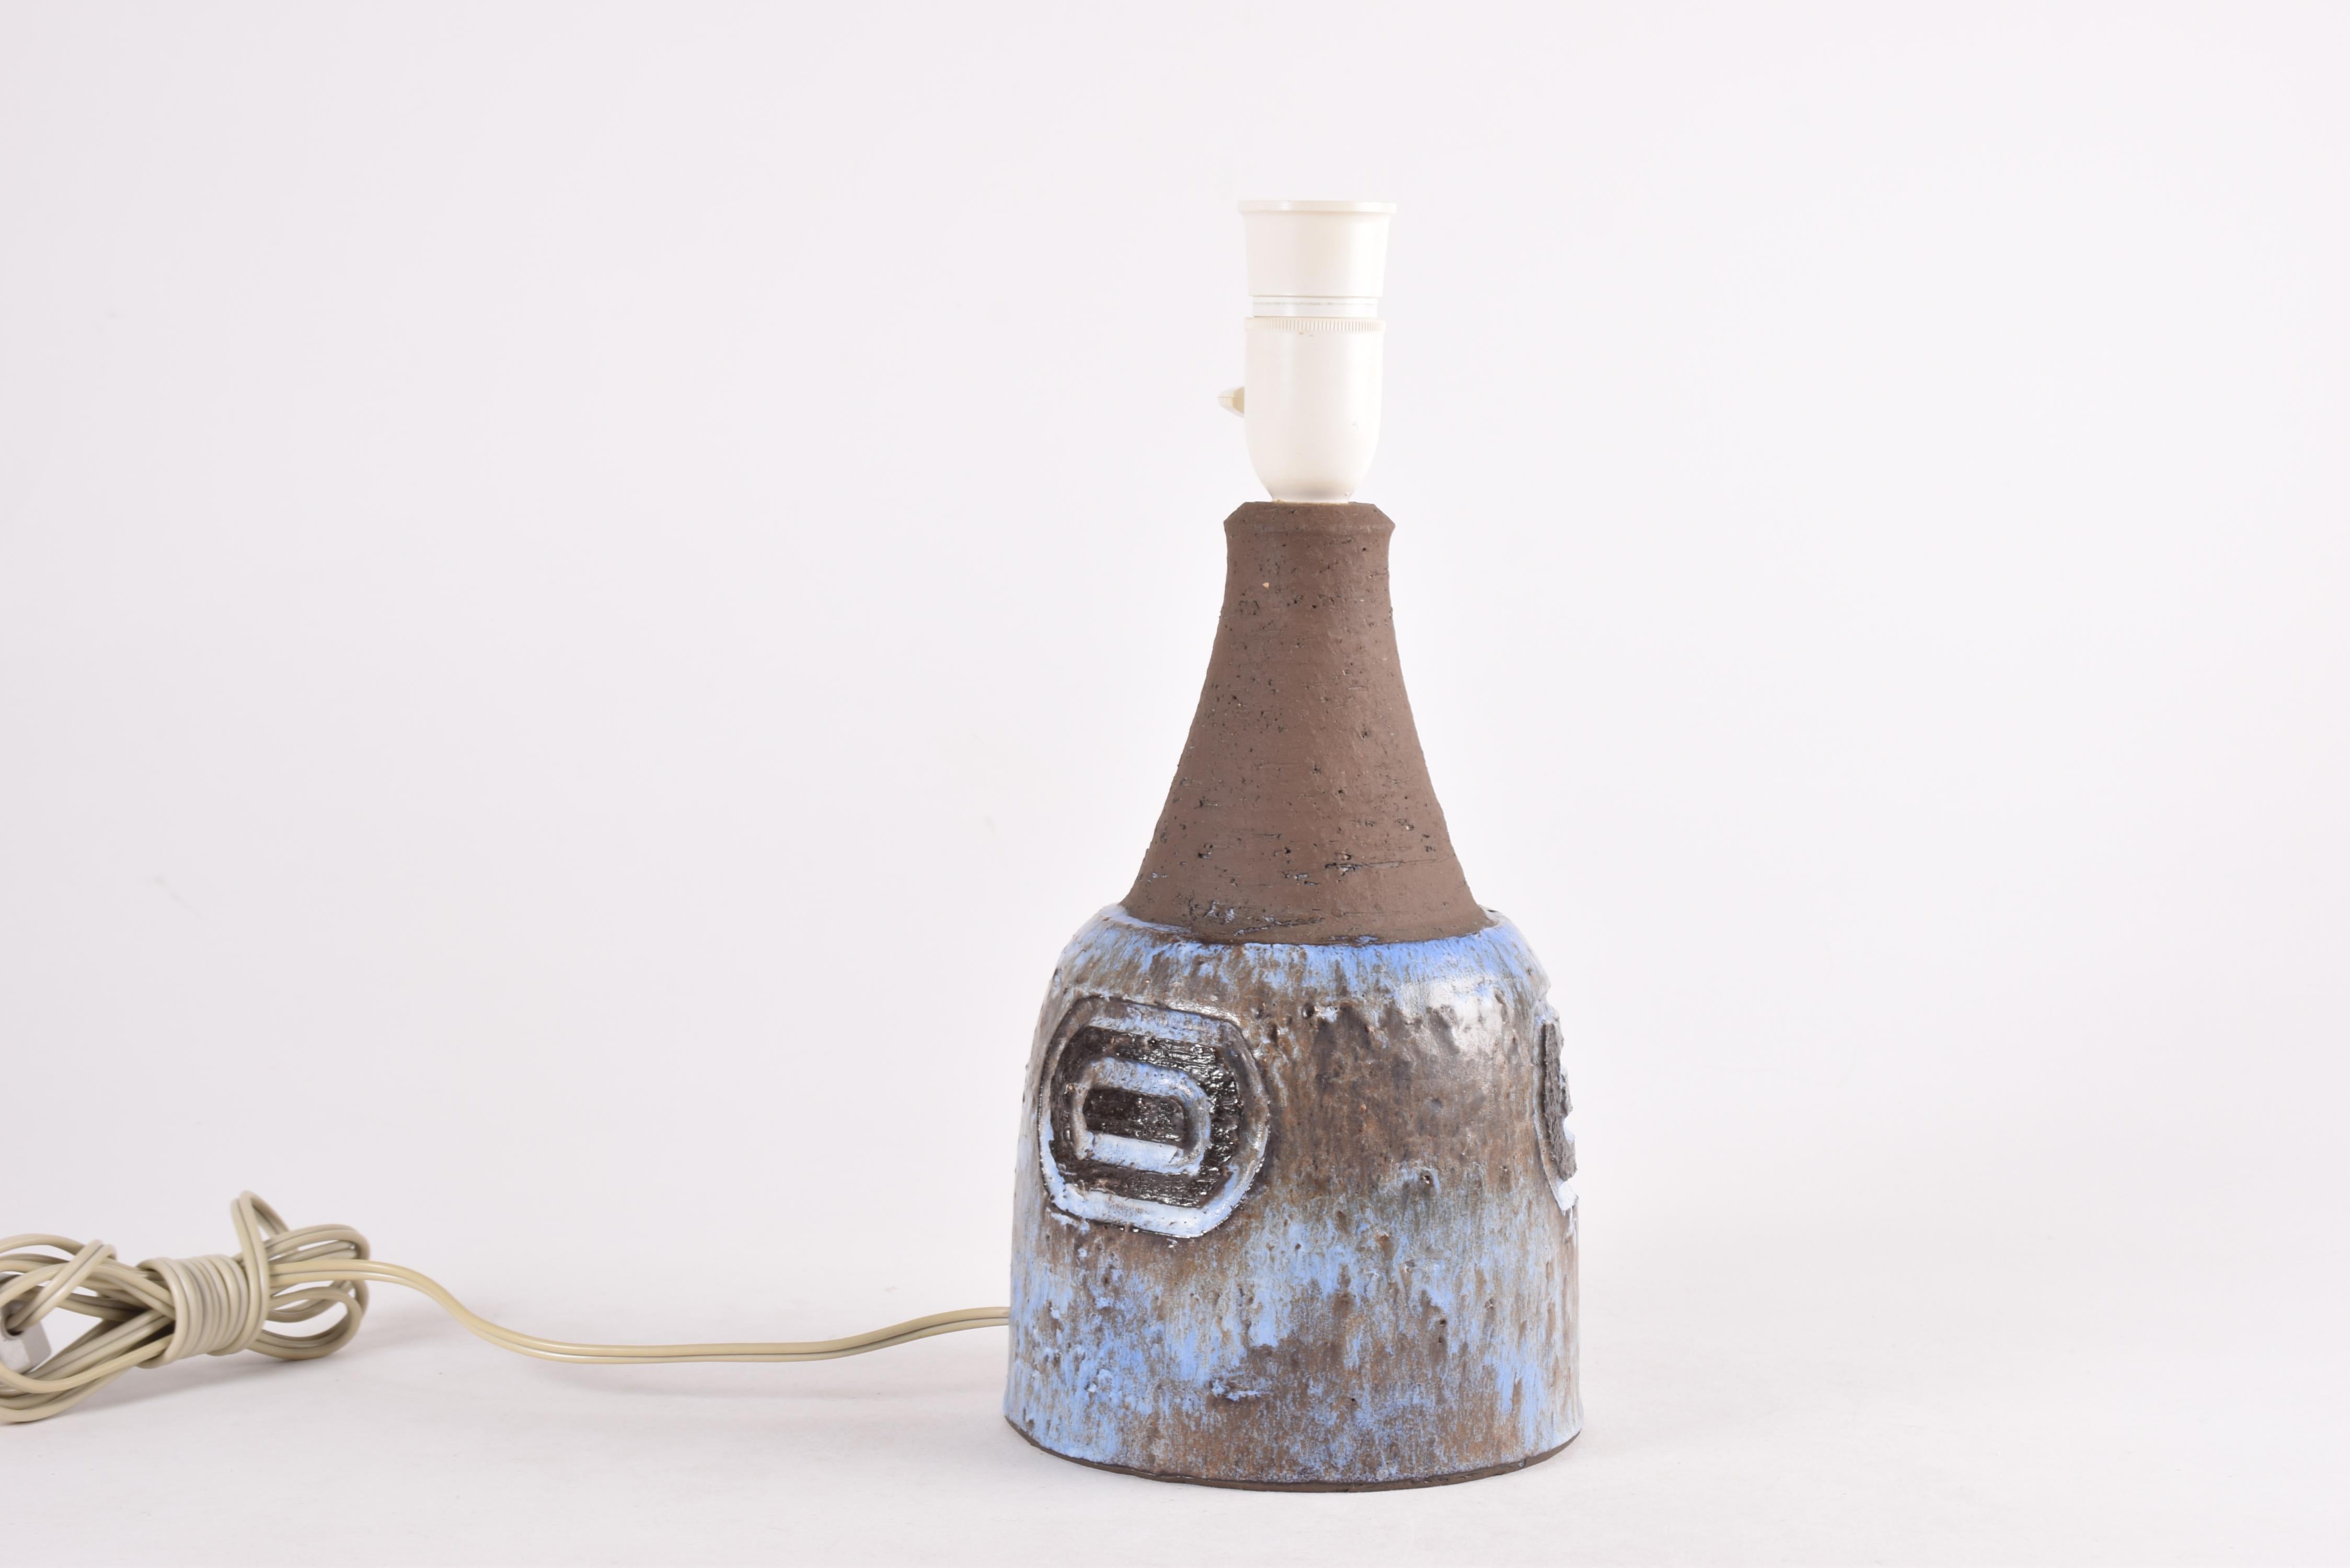 Late 20th Century Danish Midcentury Brutalist Ceramic Table Lamp Blue Brown by Sejer Unik, 1970s For Sale